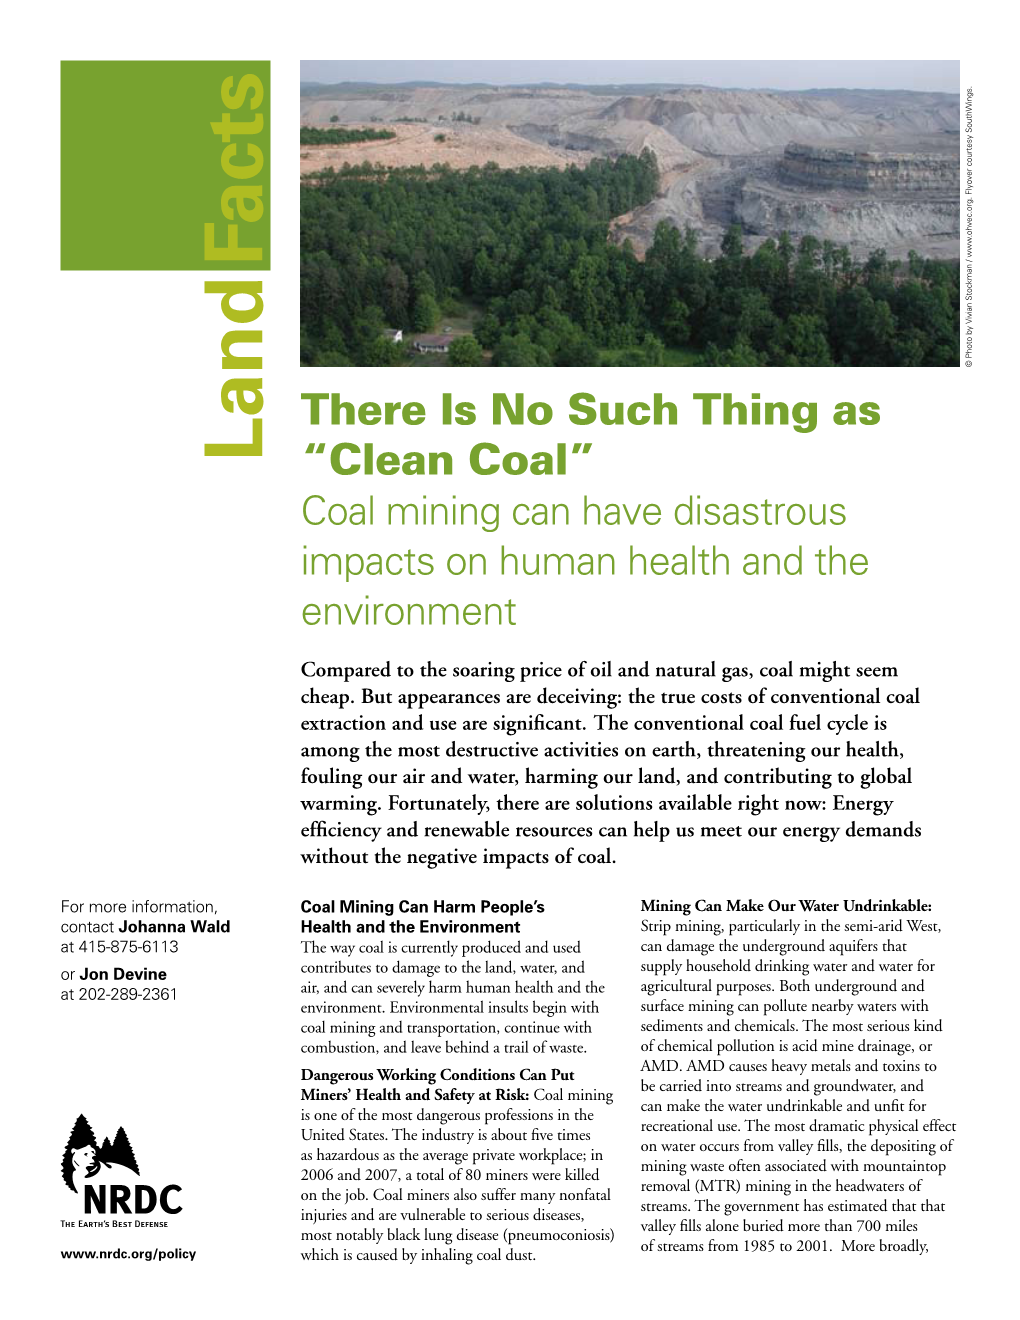 There Is No Such Thing As "Clean Coal": Coal Mining Can Have